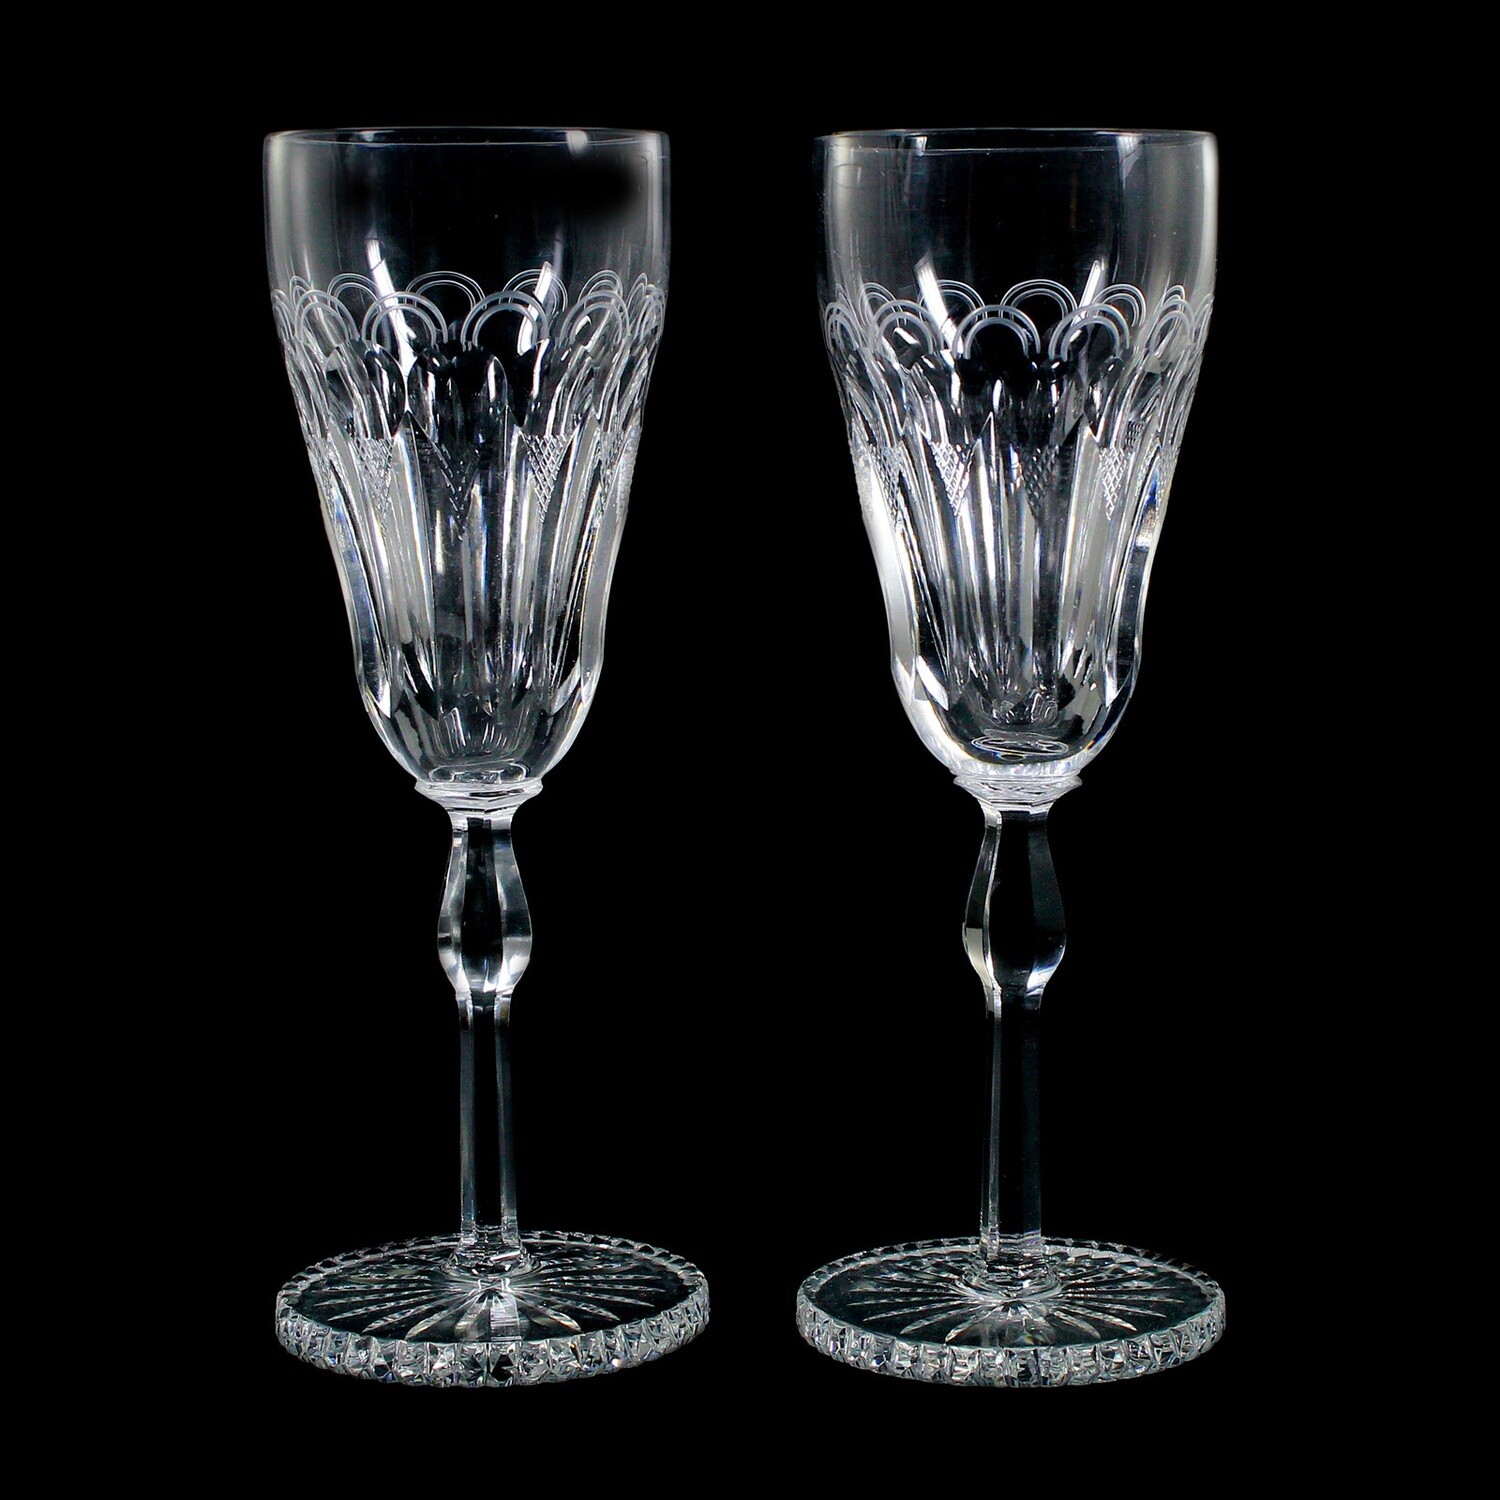 2 champagne glasses made of cut-decorated lead crystal with a solid base plate, around 1930-40